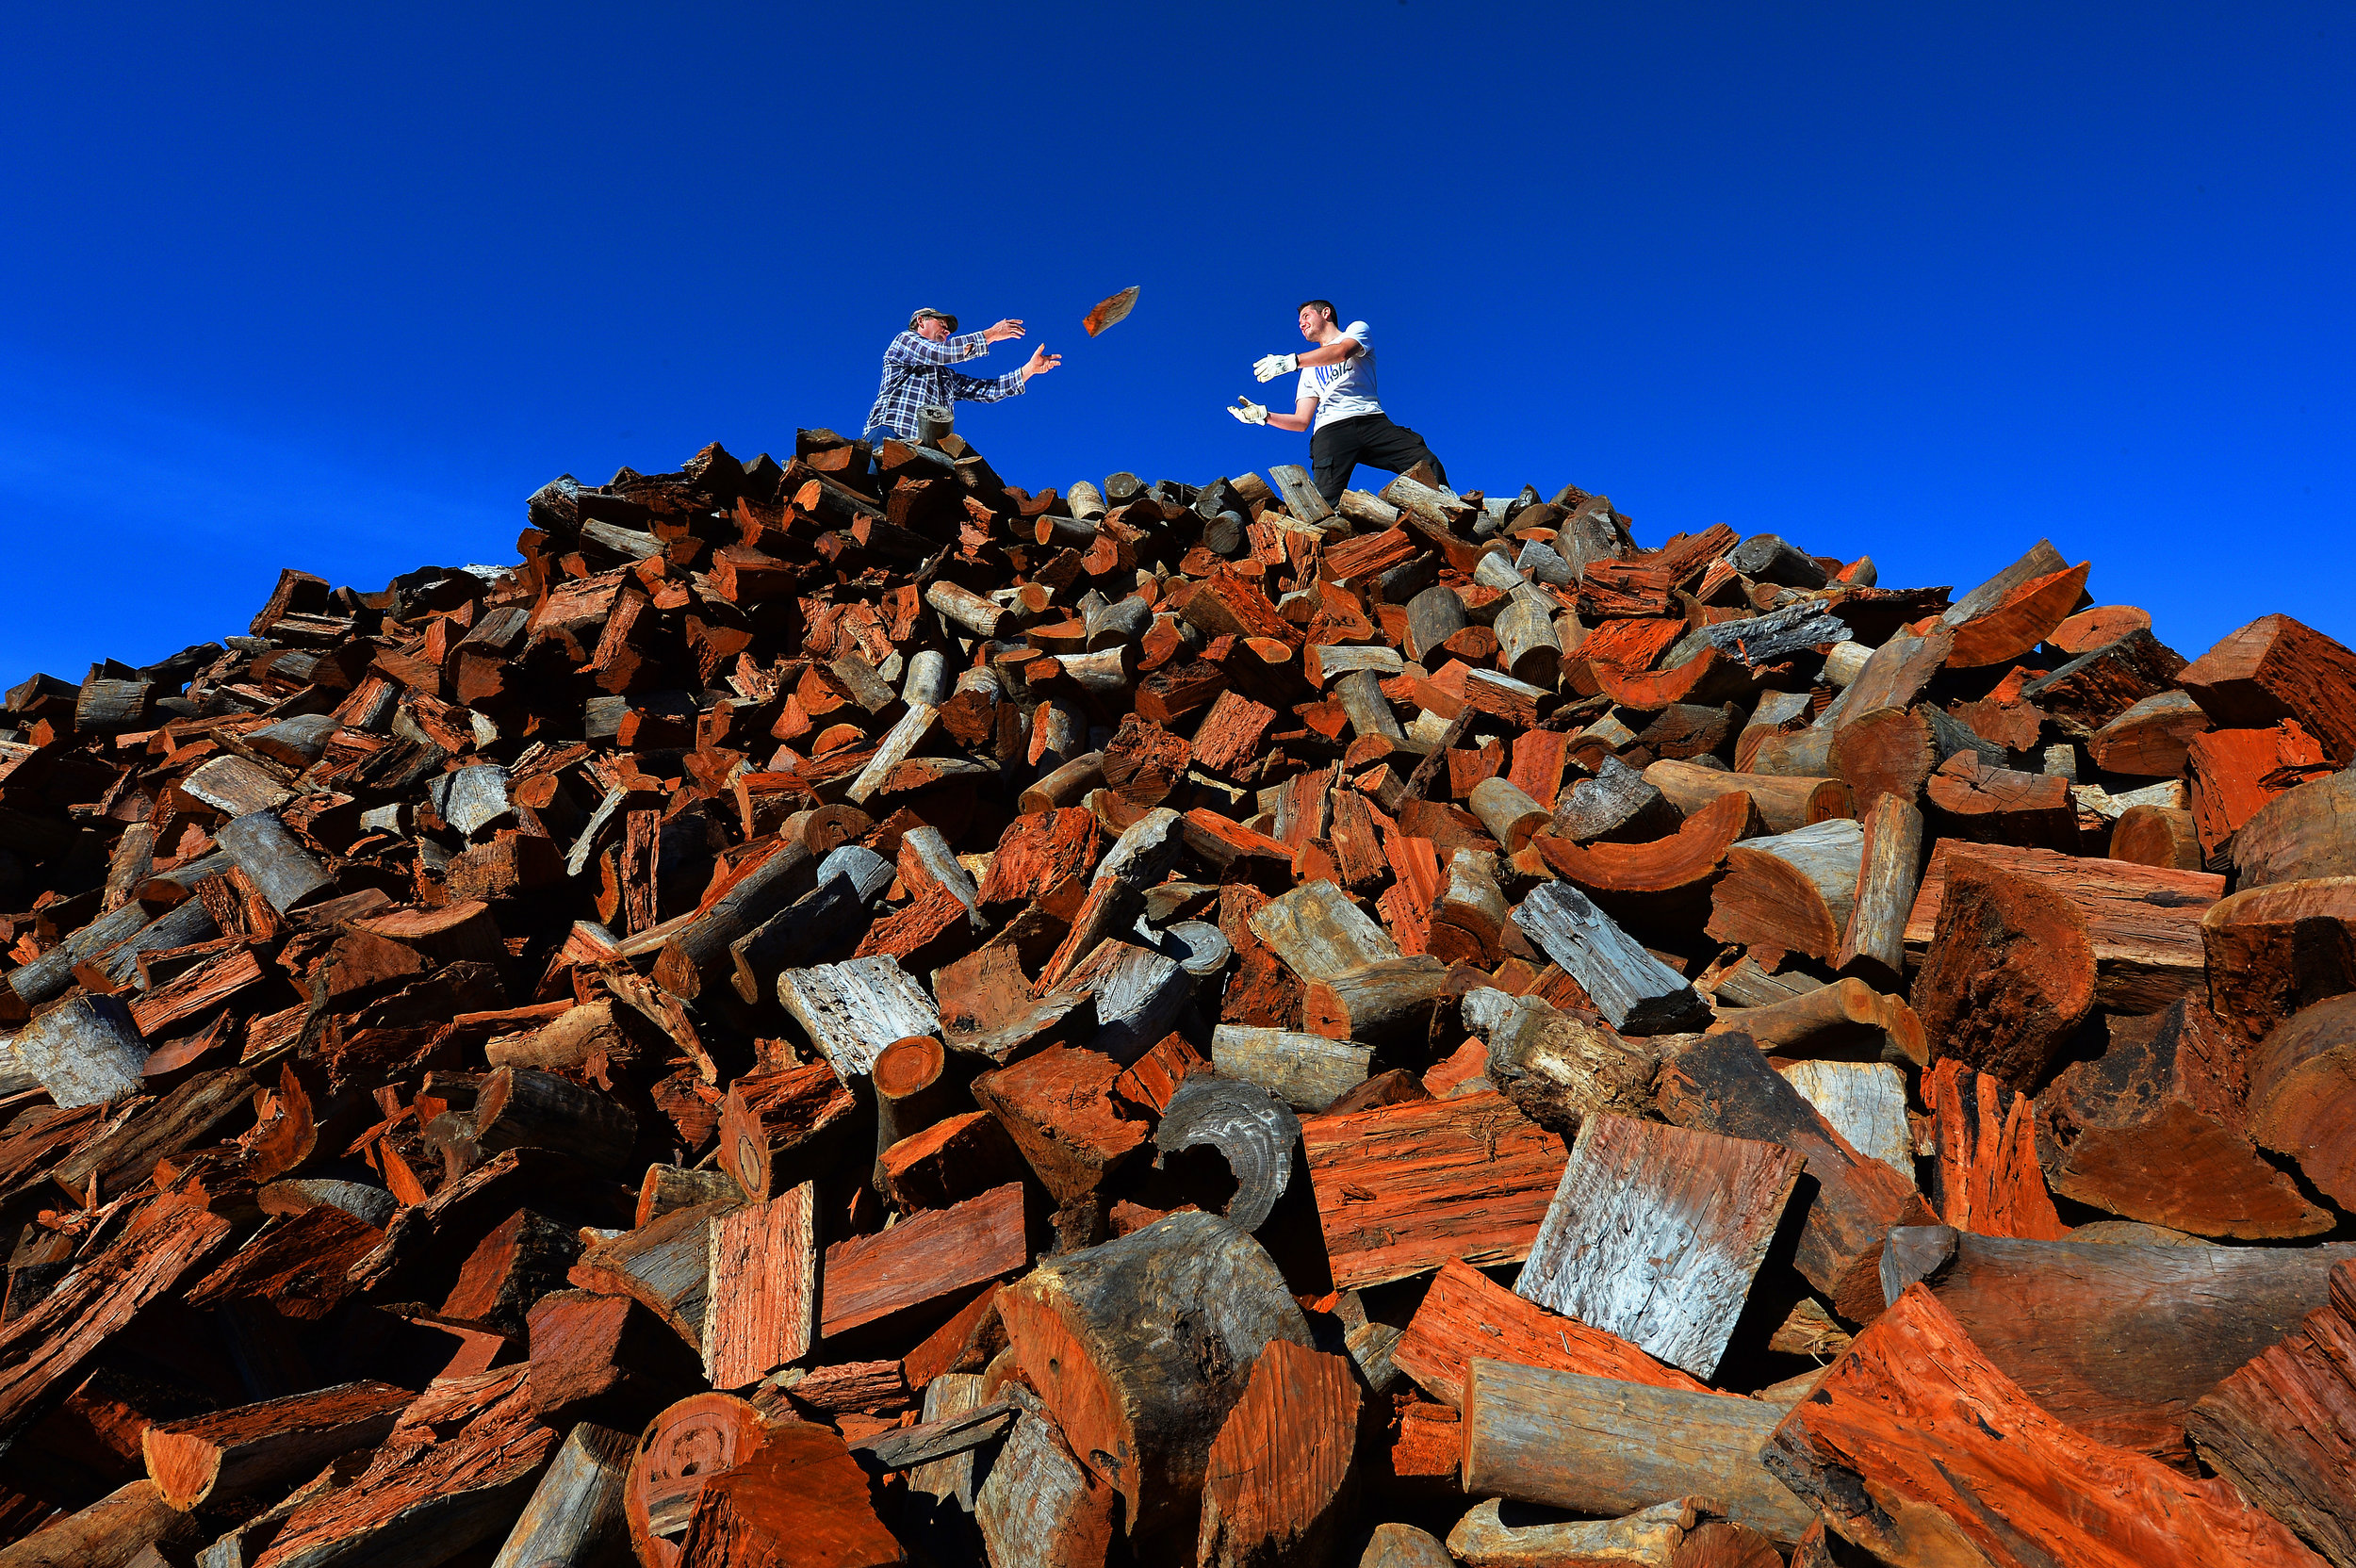 CHP_Export_14345953_Alex Houghton and Rob Prins  on top of 2500 tons of wood at Robs redgum at C.jpg